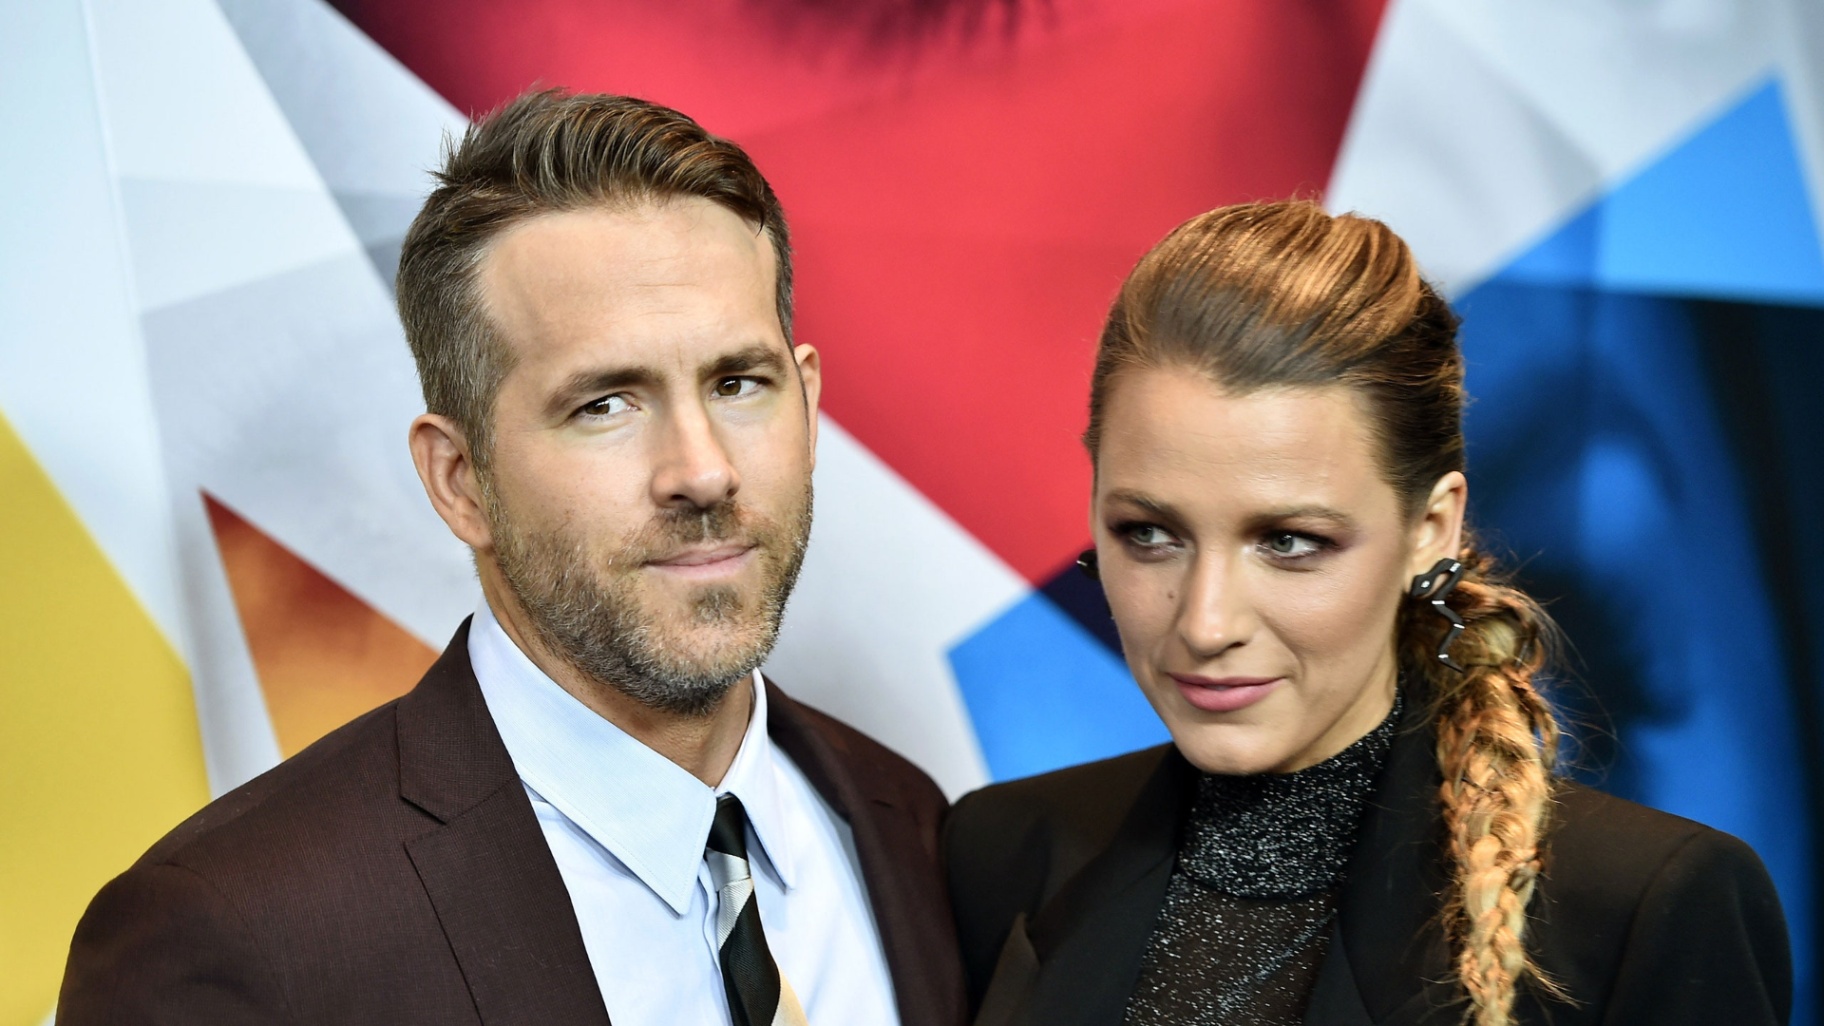 20 Times Everyone Fell in Love with Blake Lively and Ryan Reynolds